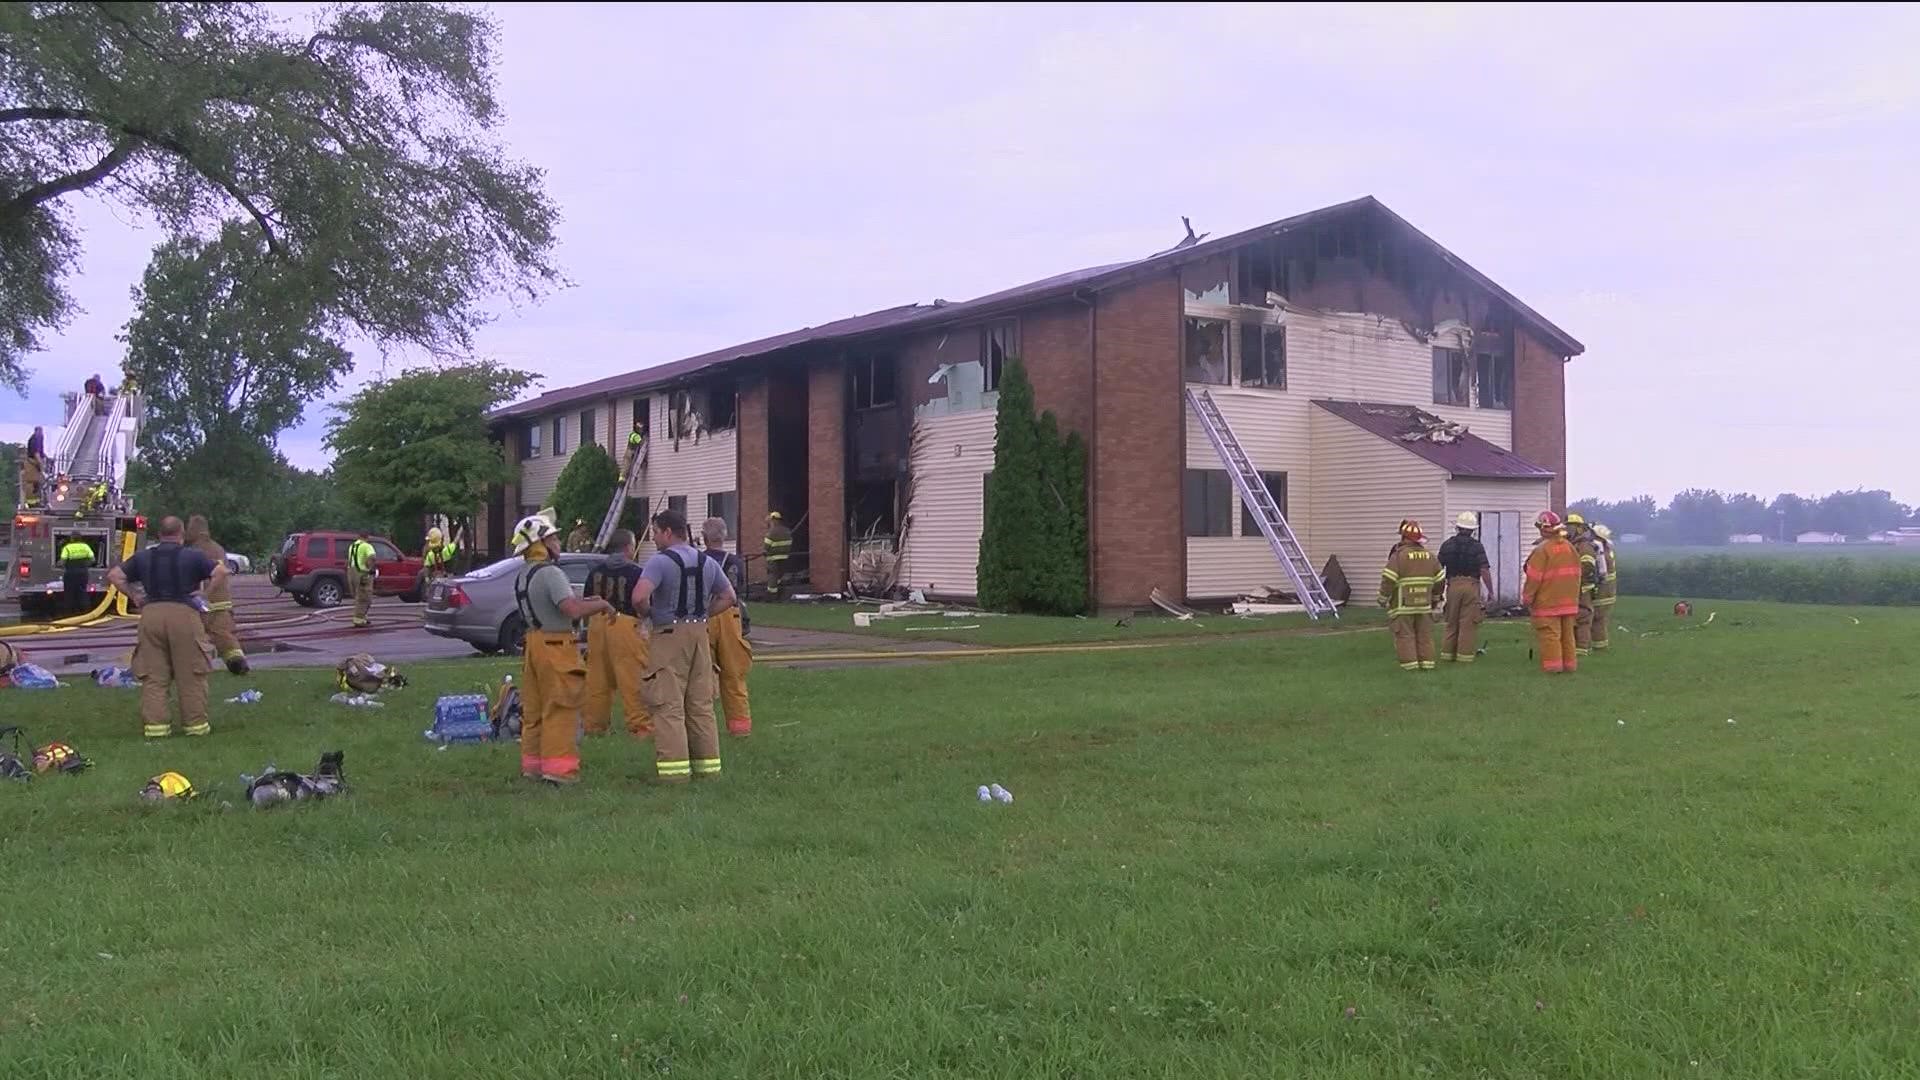 Crews were called to the Broad Oak apartments around 7:45 a.m. Thursday morning.